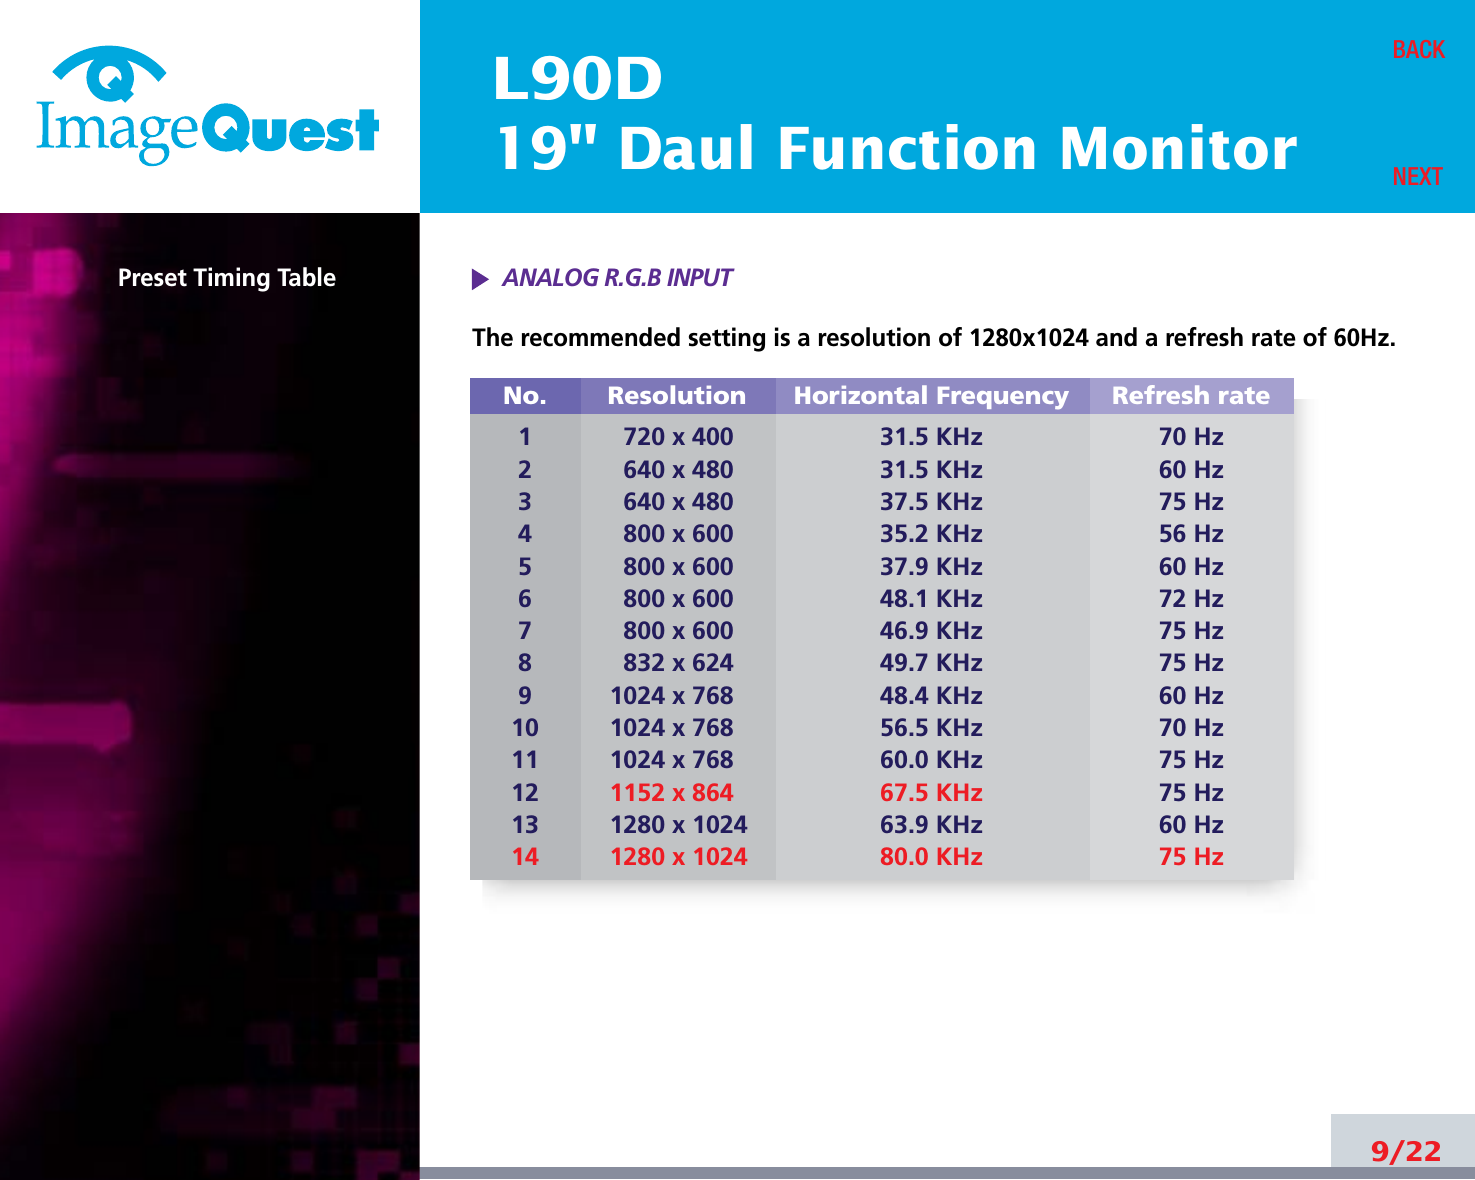 L90D19&quot; Daul Function MonitorPreset Timing TableThe recommended setting is a resolution of 1280x1024 and a refresh rate of 60Hz.9/22BACKNEXTNo.1234567891011121314Resolution720 x 400640 x 480640 x 480 800 x 600800 x 600800 x 600800 x 600832 x 6241024 x 7681024 x 7681024 x 7681152 x 8641280 x 10241280 x 1024Horizontal Frequency31.5 KHz31.5 KHz37.5 KHz35.2 KHz37.9 KHz48.1 KHz46.9 KHz49.7 KHz48.4 KHz56.5 KHz60.0 KHz67.5 KHz63.9 KHz80.0 KHzRefresh rate70 Hz60 Hz75 Hz56 Hz60 Hz72 Hz75 Hz75 Hz60 Hz70 Hz75 Hz75 Hz60 Hz75 HzANALOG R.G.B INPUT 